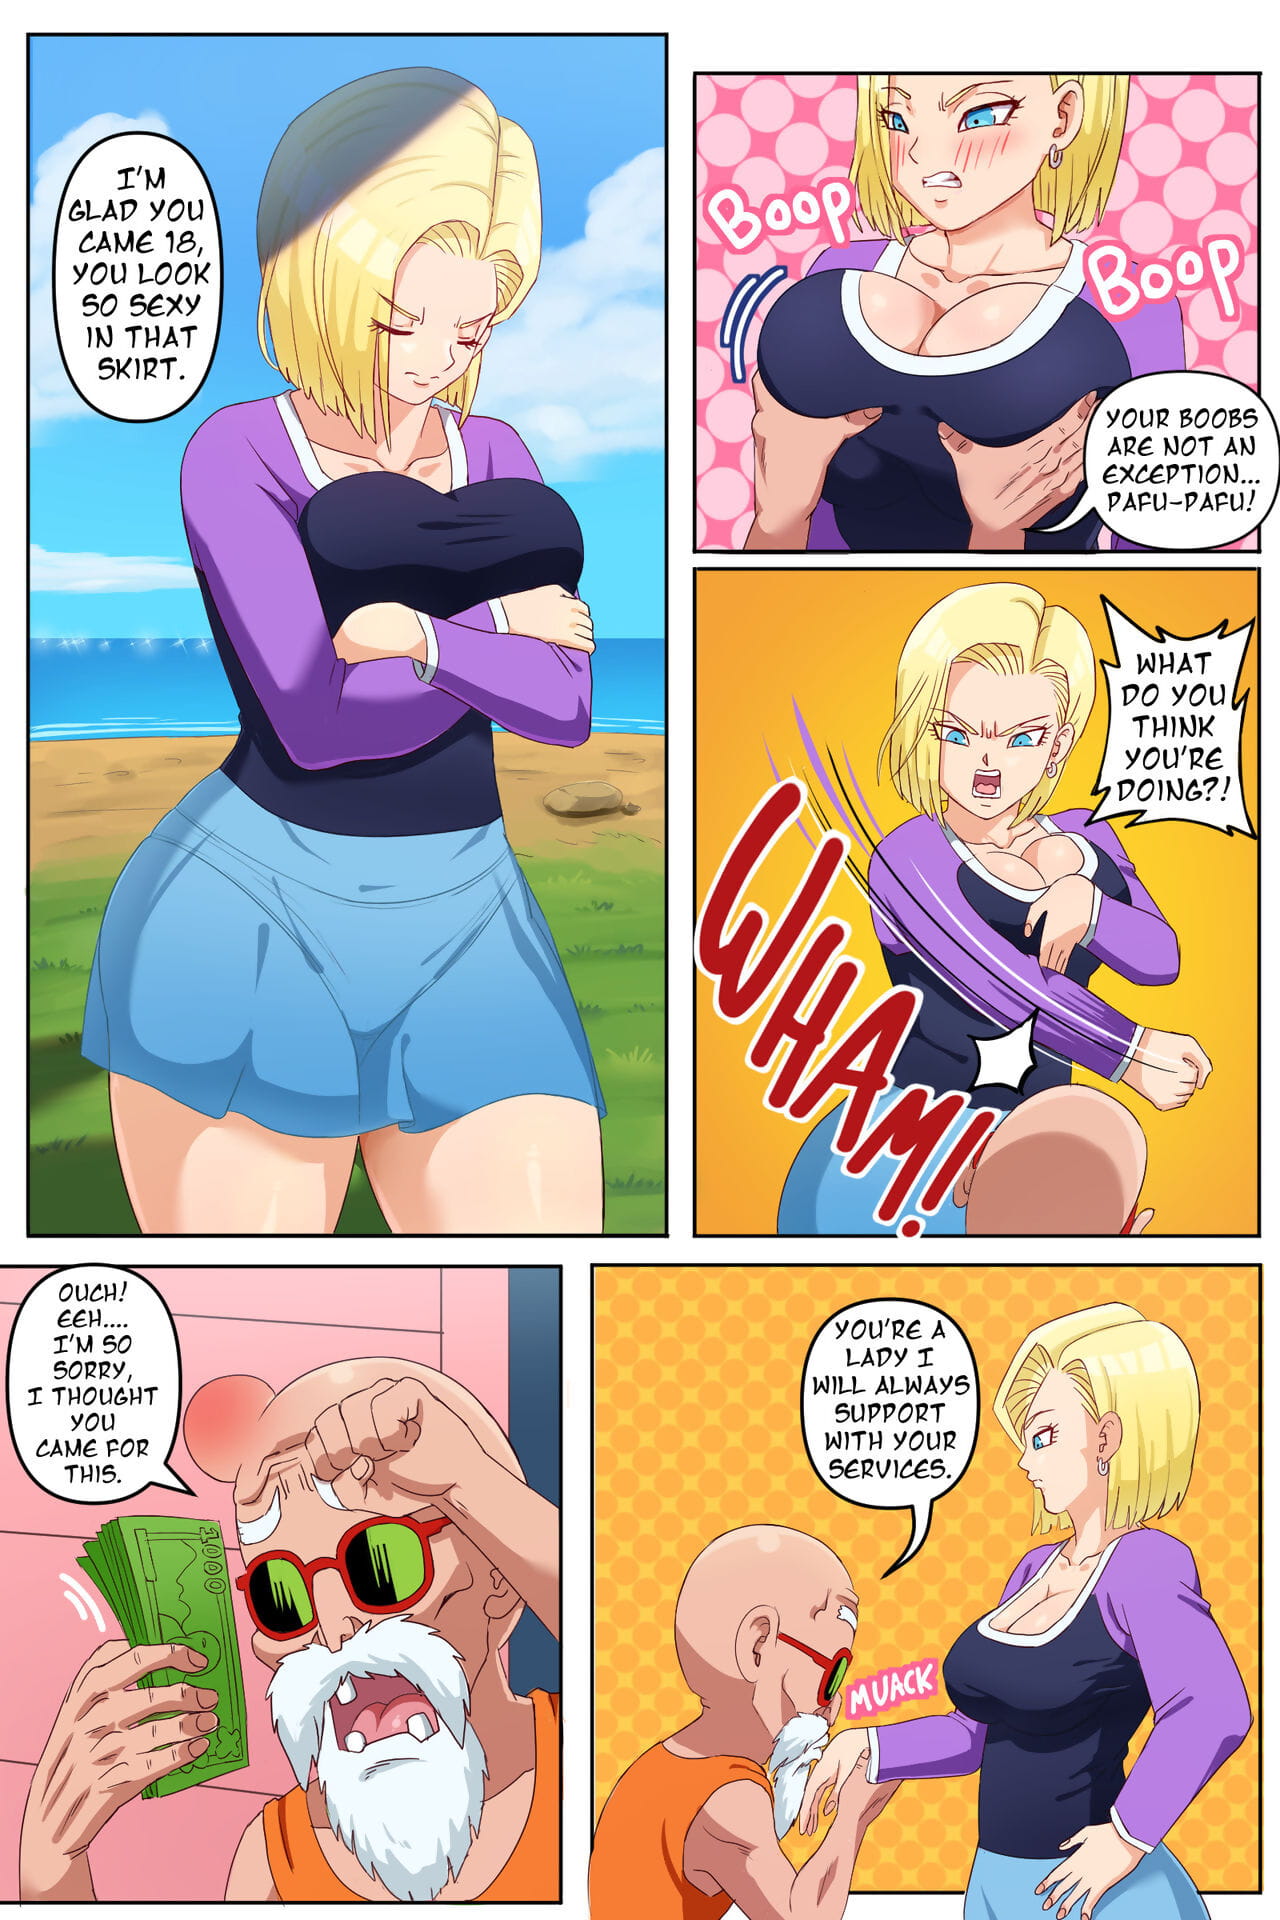 dragonball Super pinkpawg – android 18 ntr – pe 1 page 1